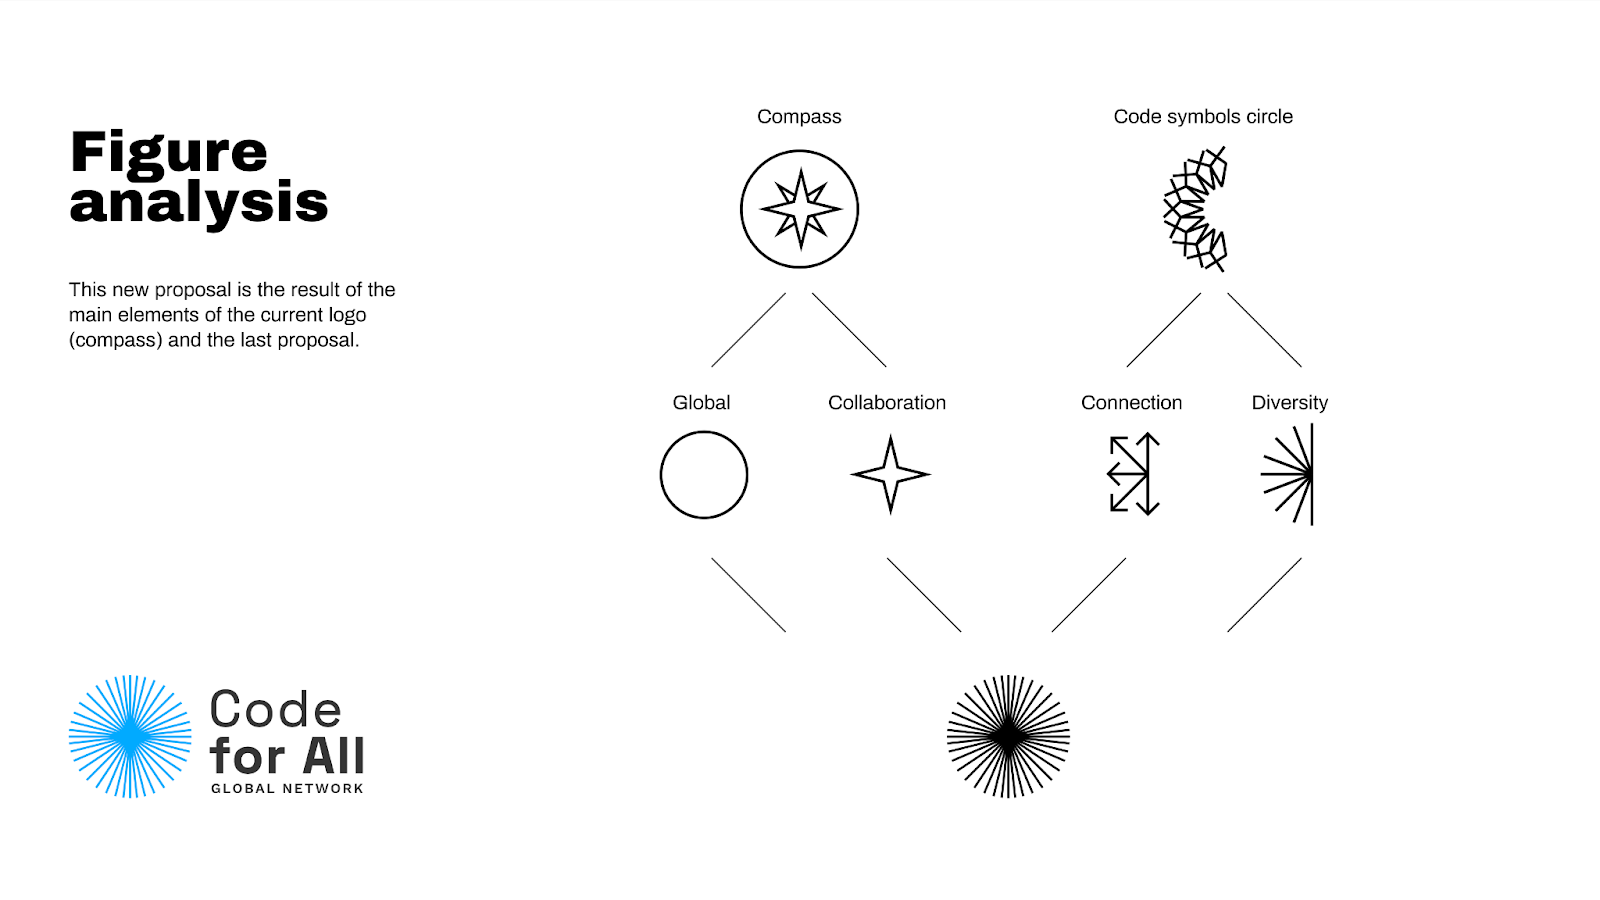 Illustration of the design process behind the new Code for All compass.